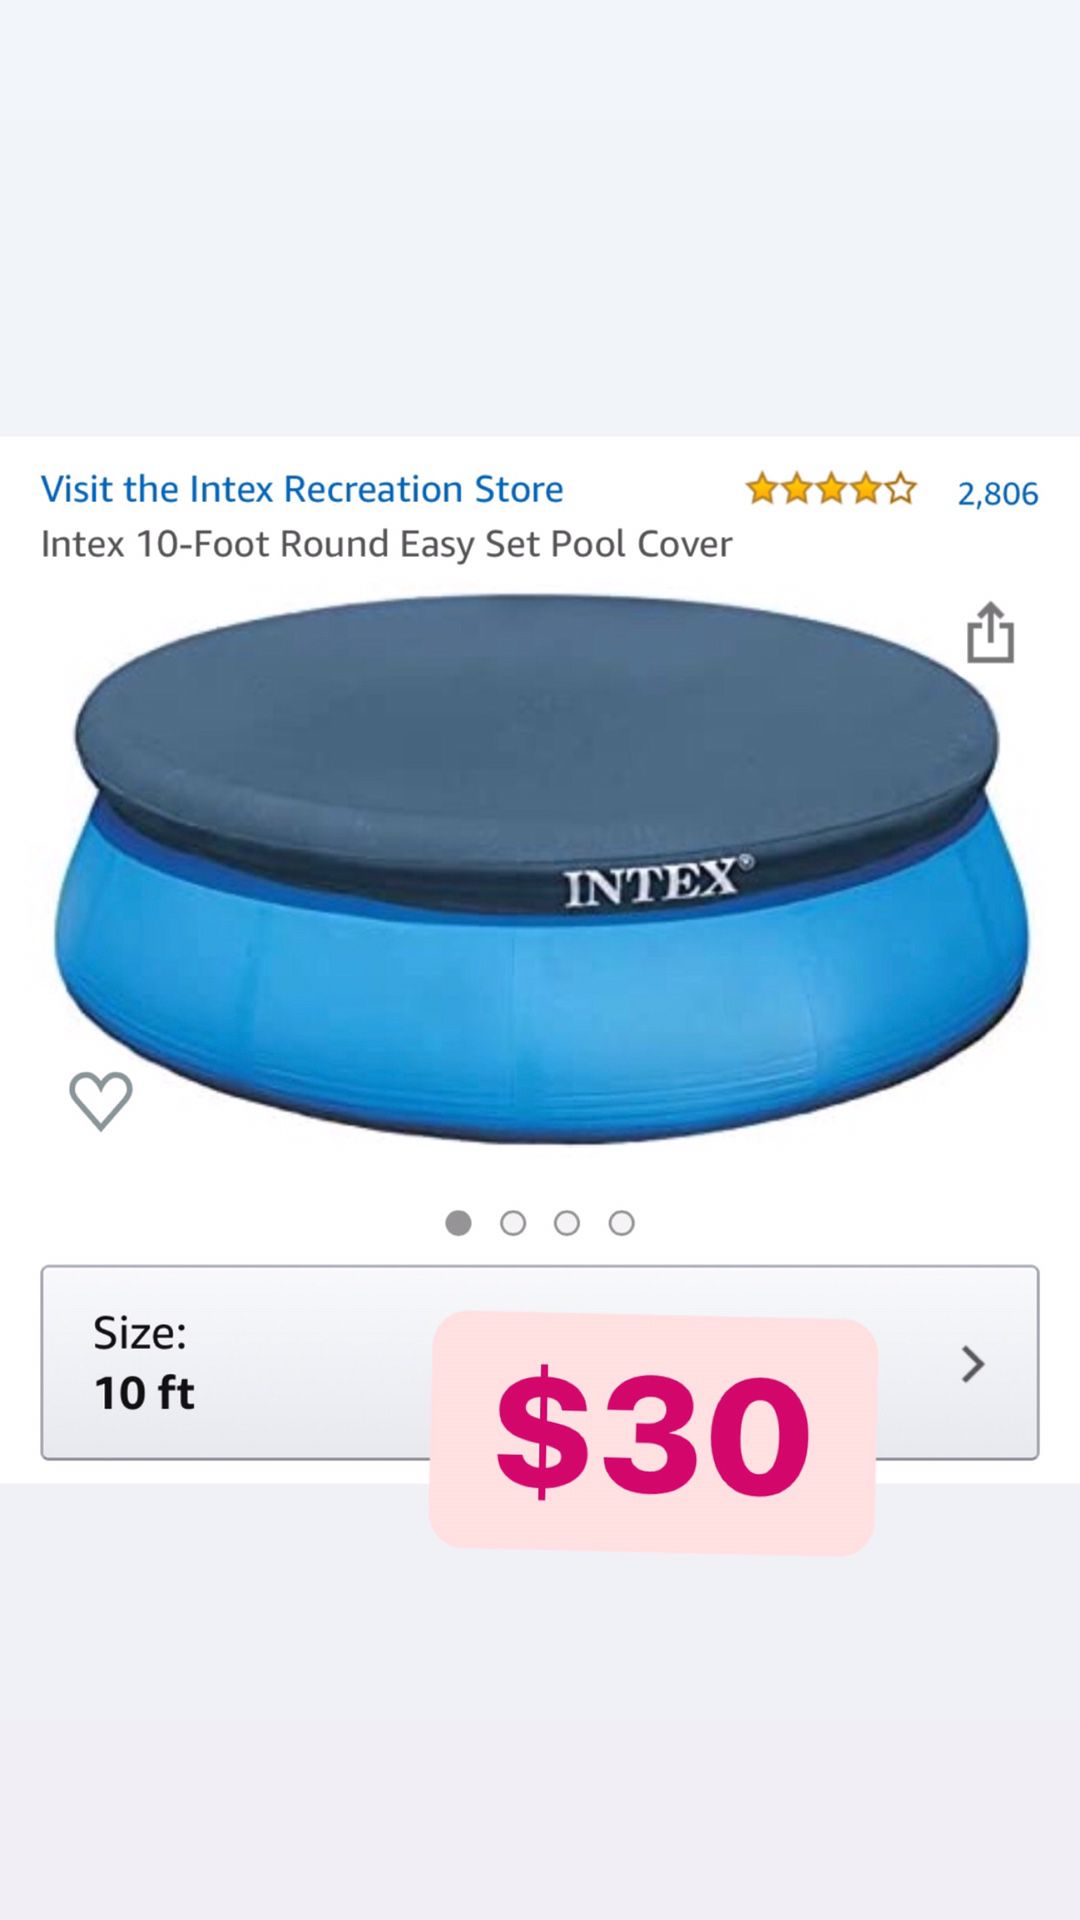 Intex 10ft Round Easy Set Pool Cover